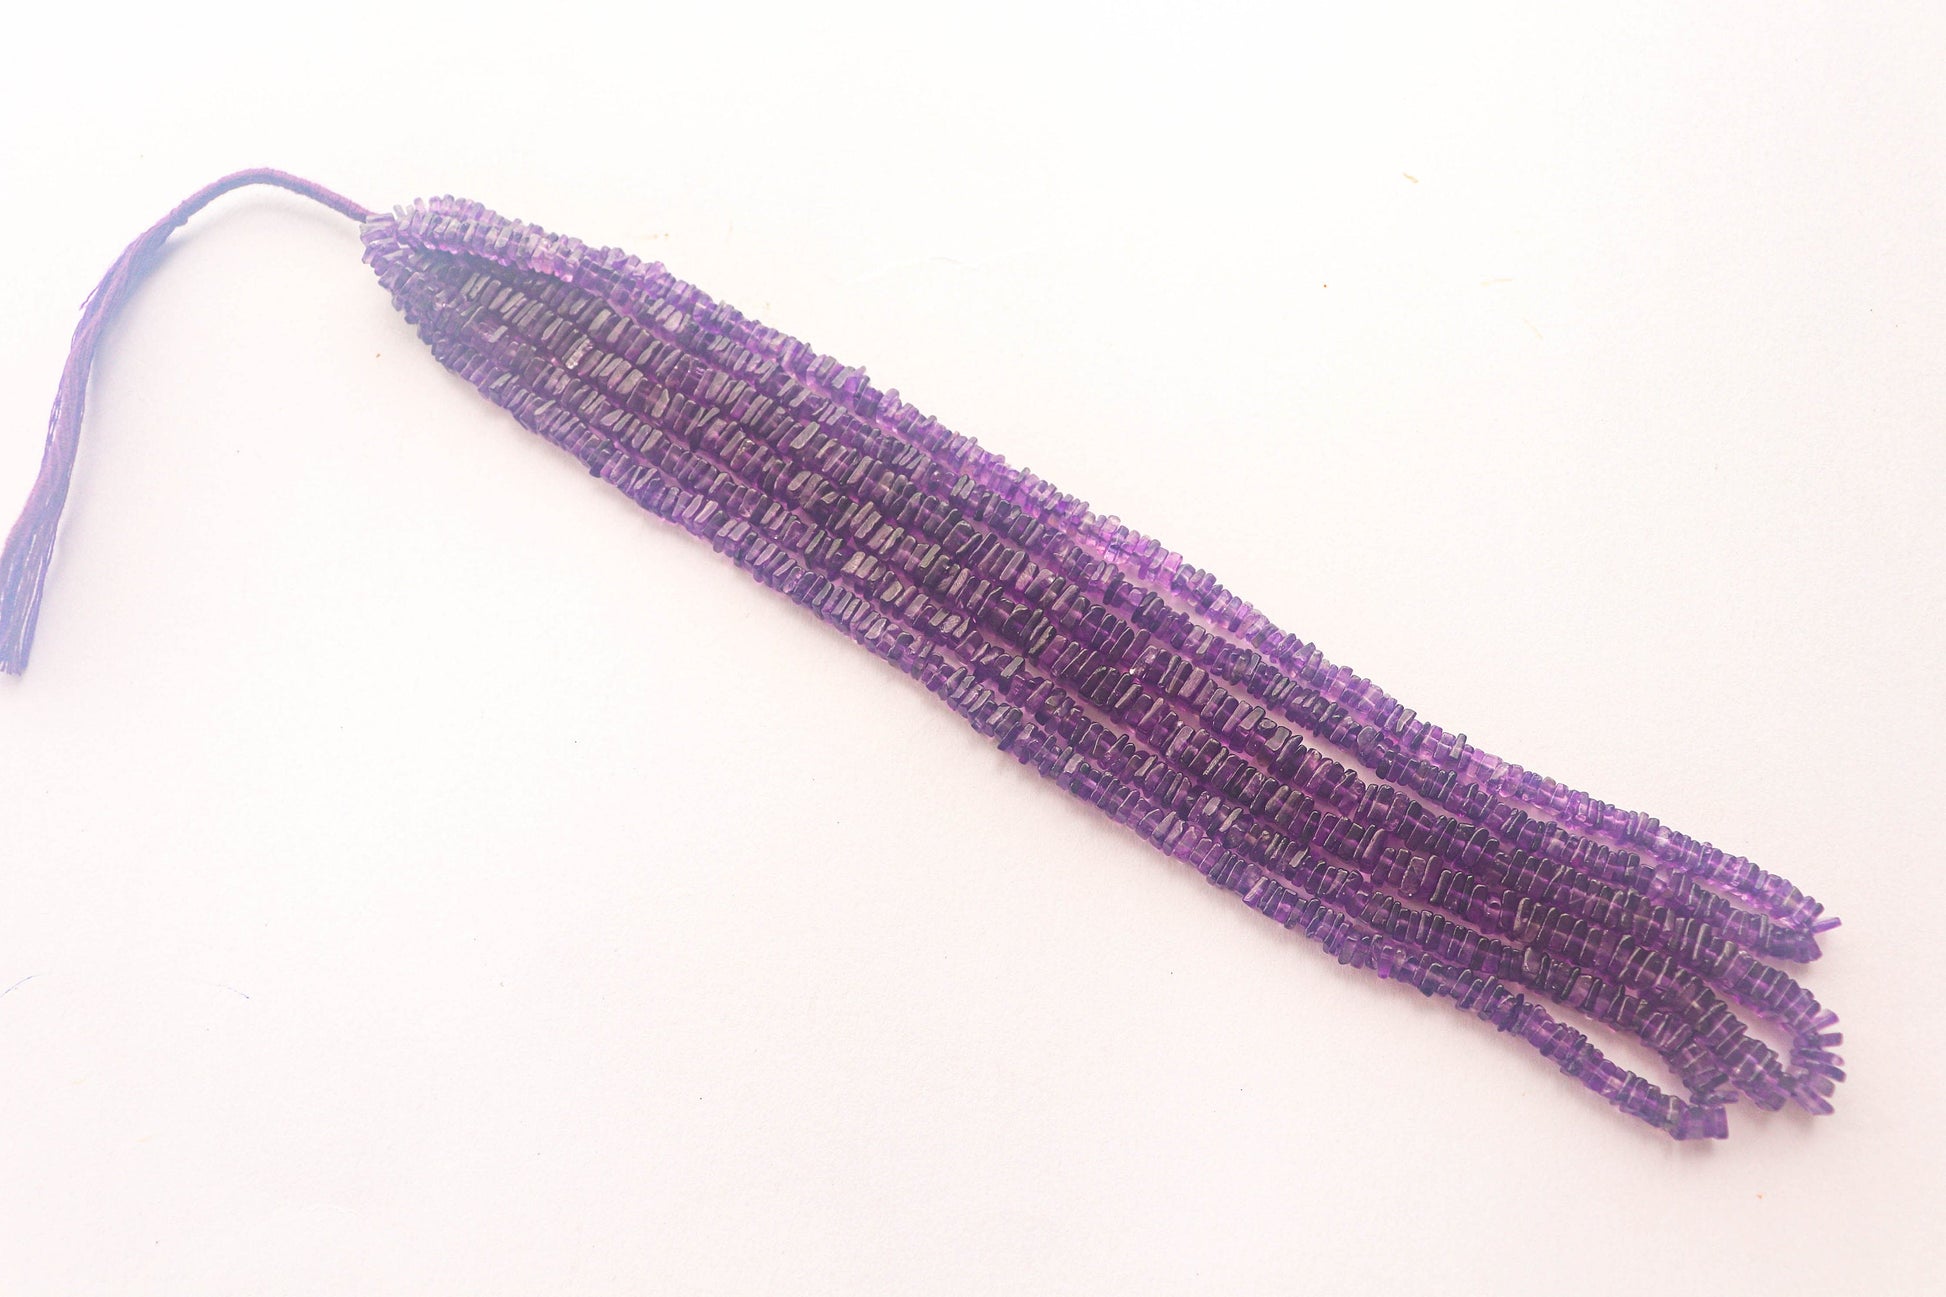 Amethyst Beads Smooth Square Heishi Shape | 4x4mm | 16 Inch Full String | Natural Gemstone Beads for Jewelry making Beadsforyourjewelry